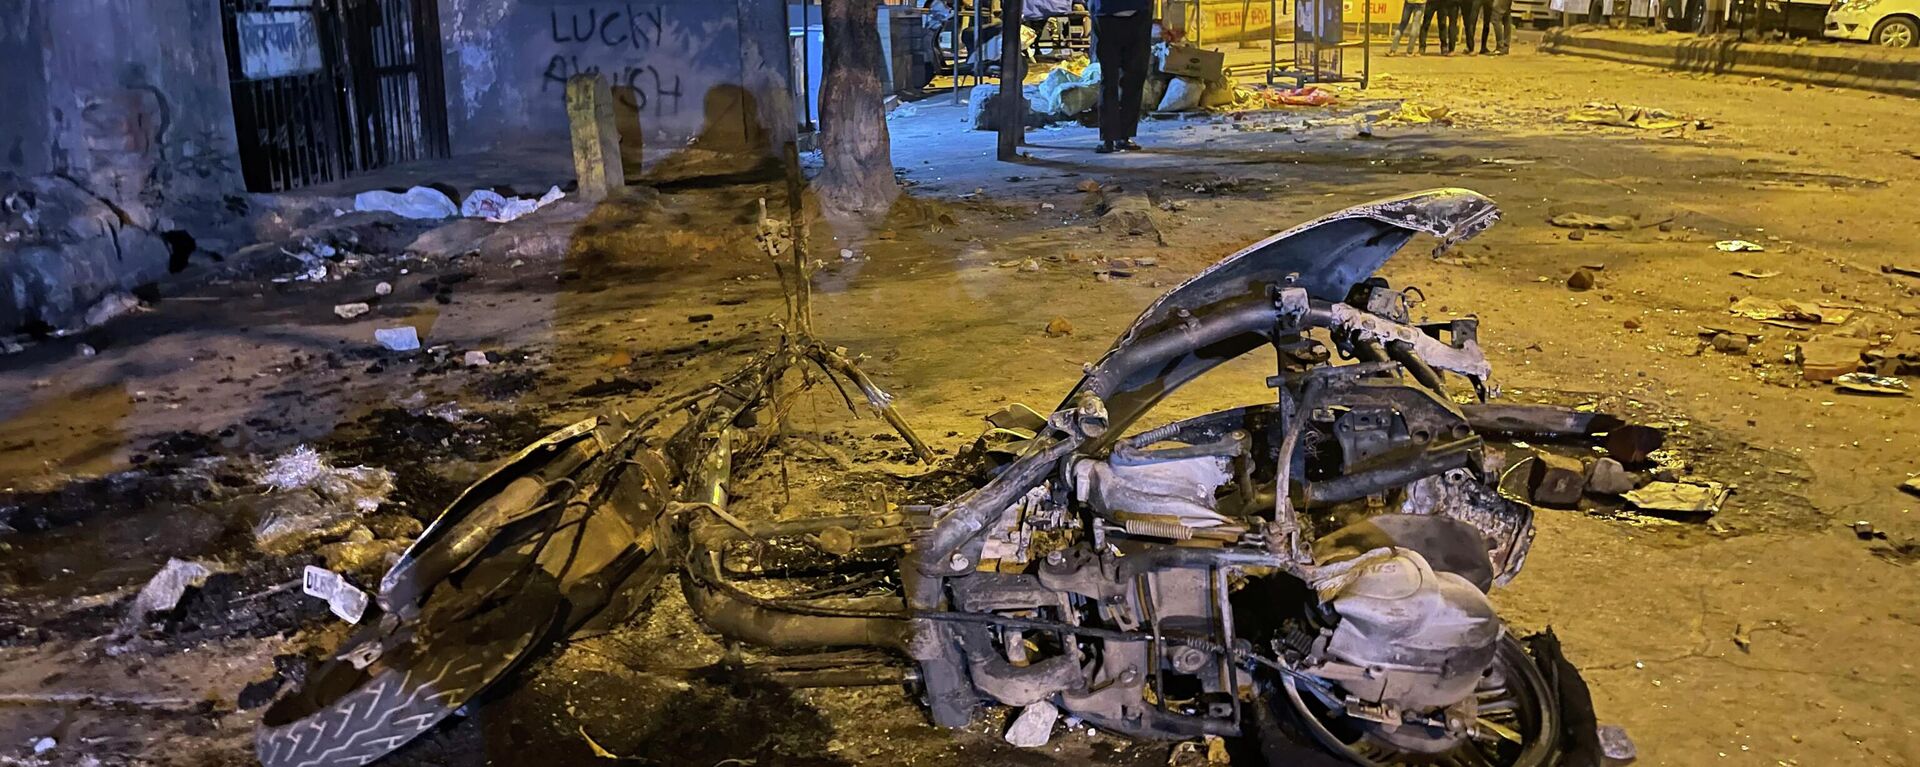 Burnt remains of a motorcycle lie in a street after communal violence in New Delhi, India, Sunday, April 17, 2022. Police in India's capital have arrested 14 people after communal violence broke out during a Hindu religious procession, leaving several injured. The suspects were arrested on charges of rioting and criminal conspiracy, among others, according to local media reports Sunday. - Sputnik International, 1920, 19.04.2022